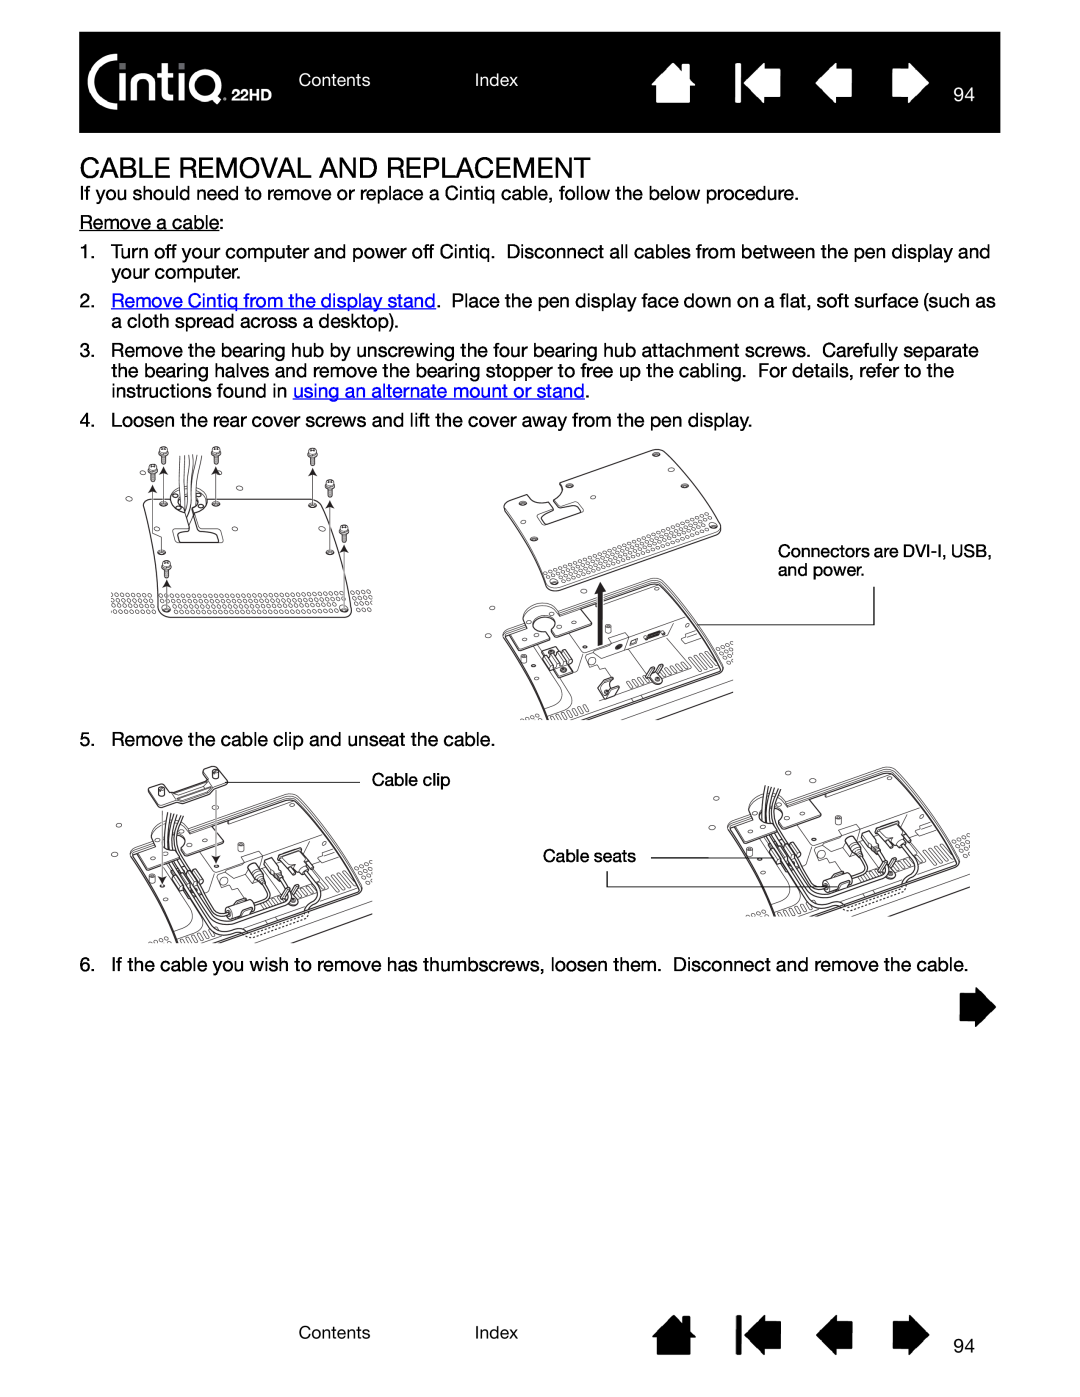 Wacom DTK-2200 user manual Cable Removal And Replacement 